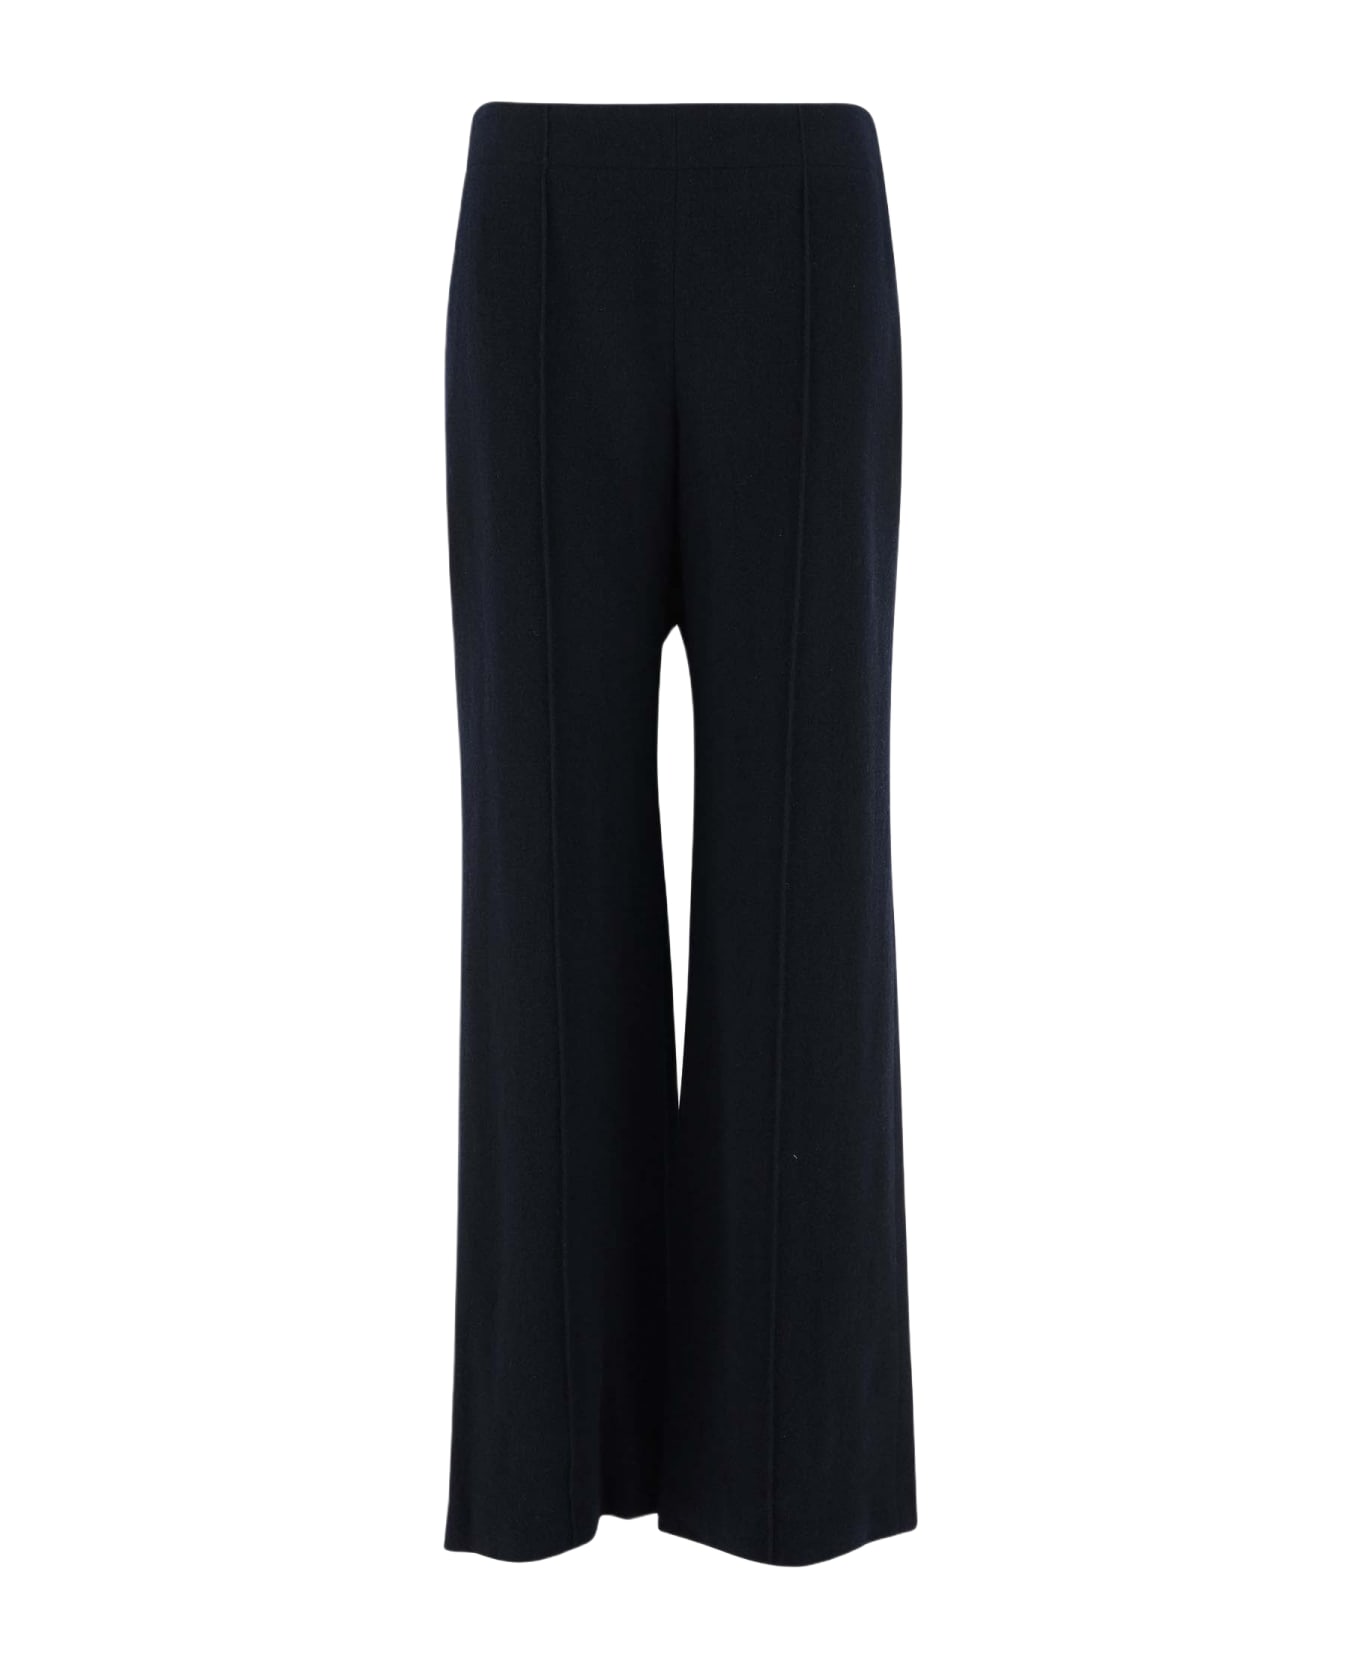 Chloé Wool And Cashmere Blend Pants - Blue